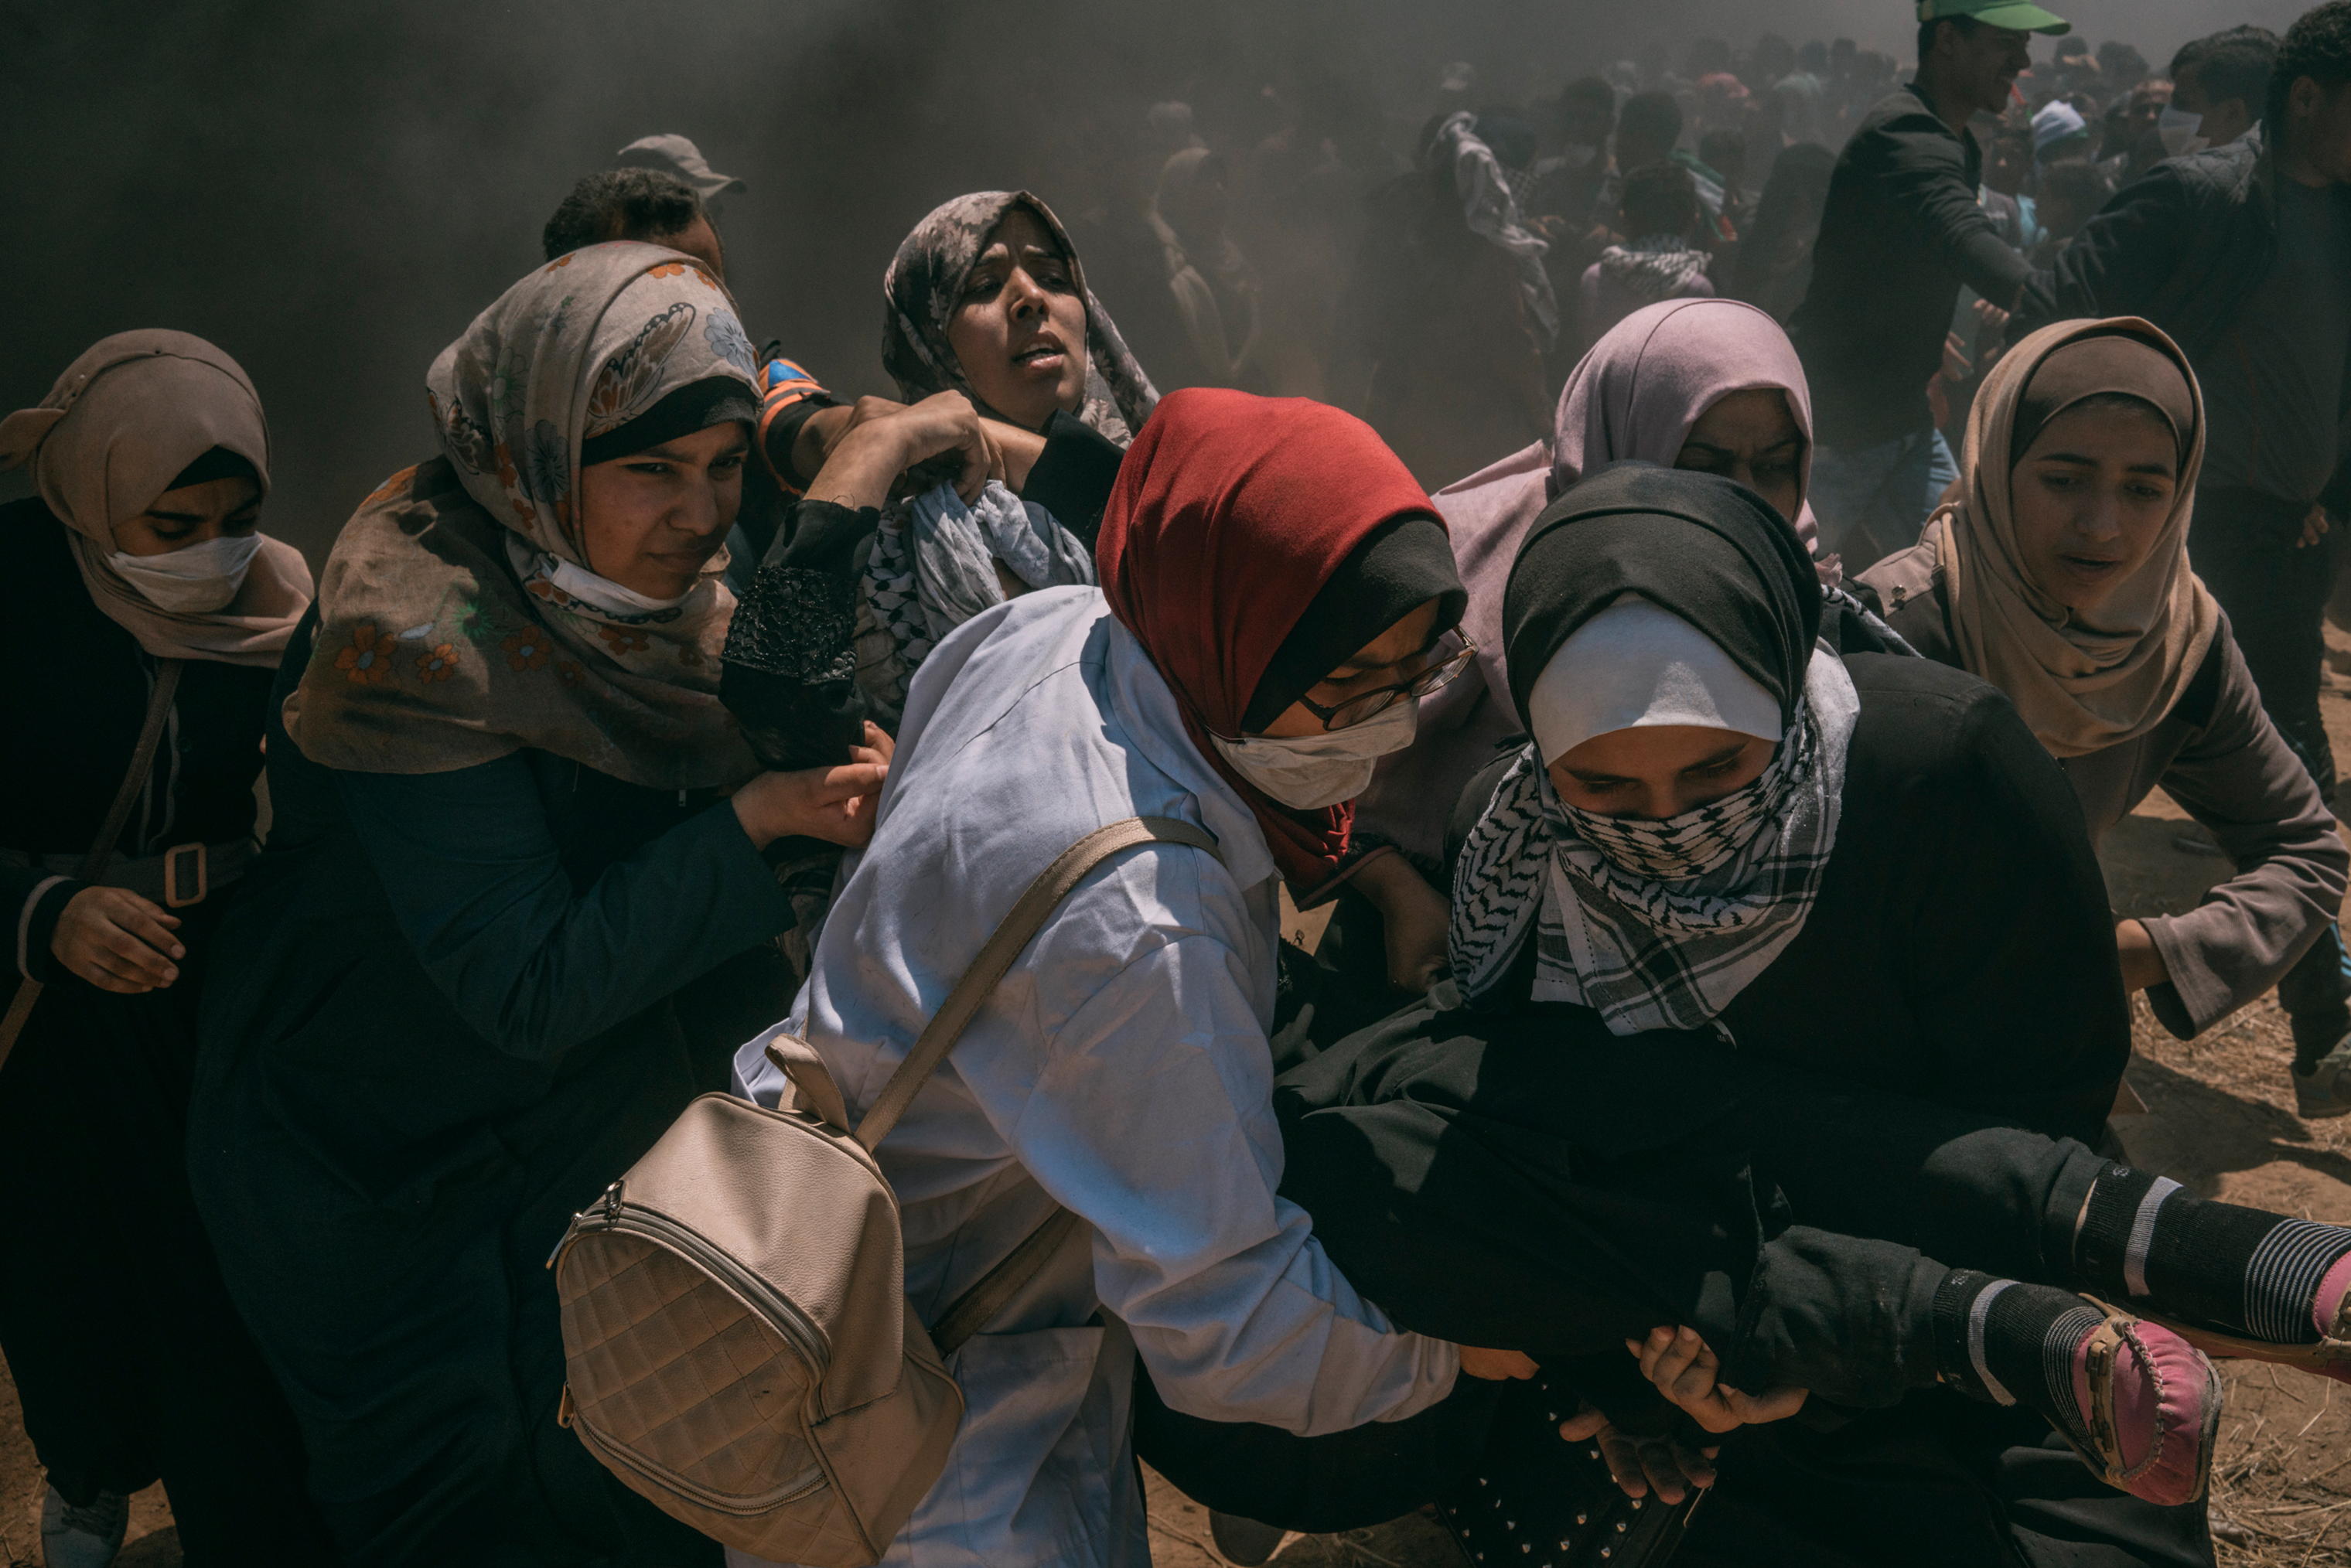 A wounded woman is evacuated by other women after she was injured in the head during the protest along the Gaza-Israel border. (Emanuele Satolli for TIME)